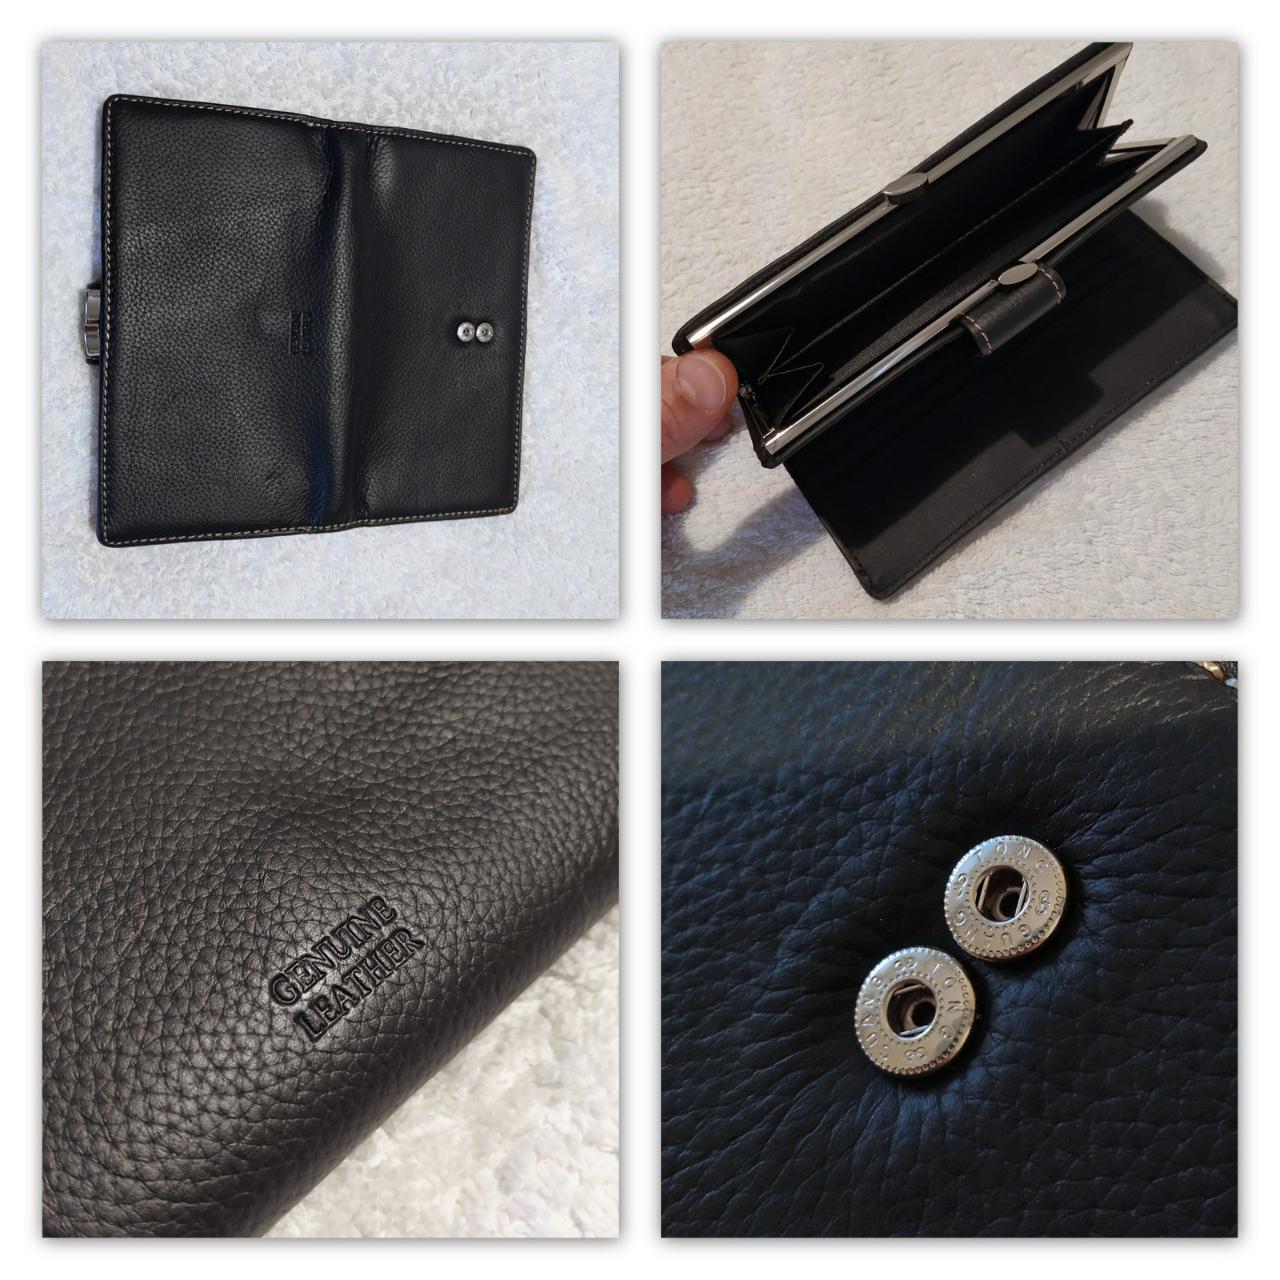 Guang Tong Black Wallet/Change Purse for Sale in Houston, TX - OfferUp